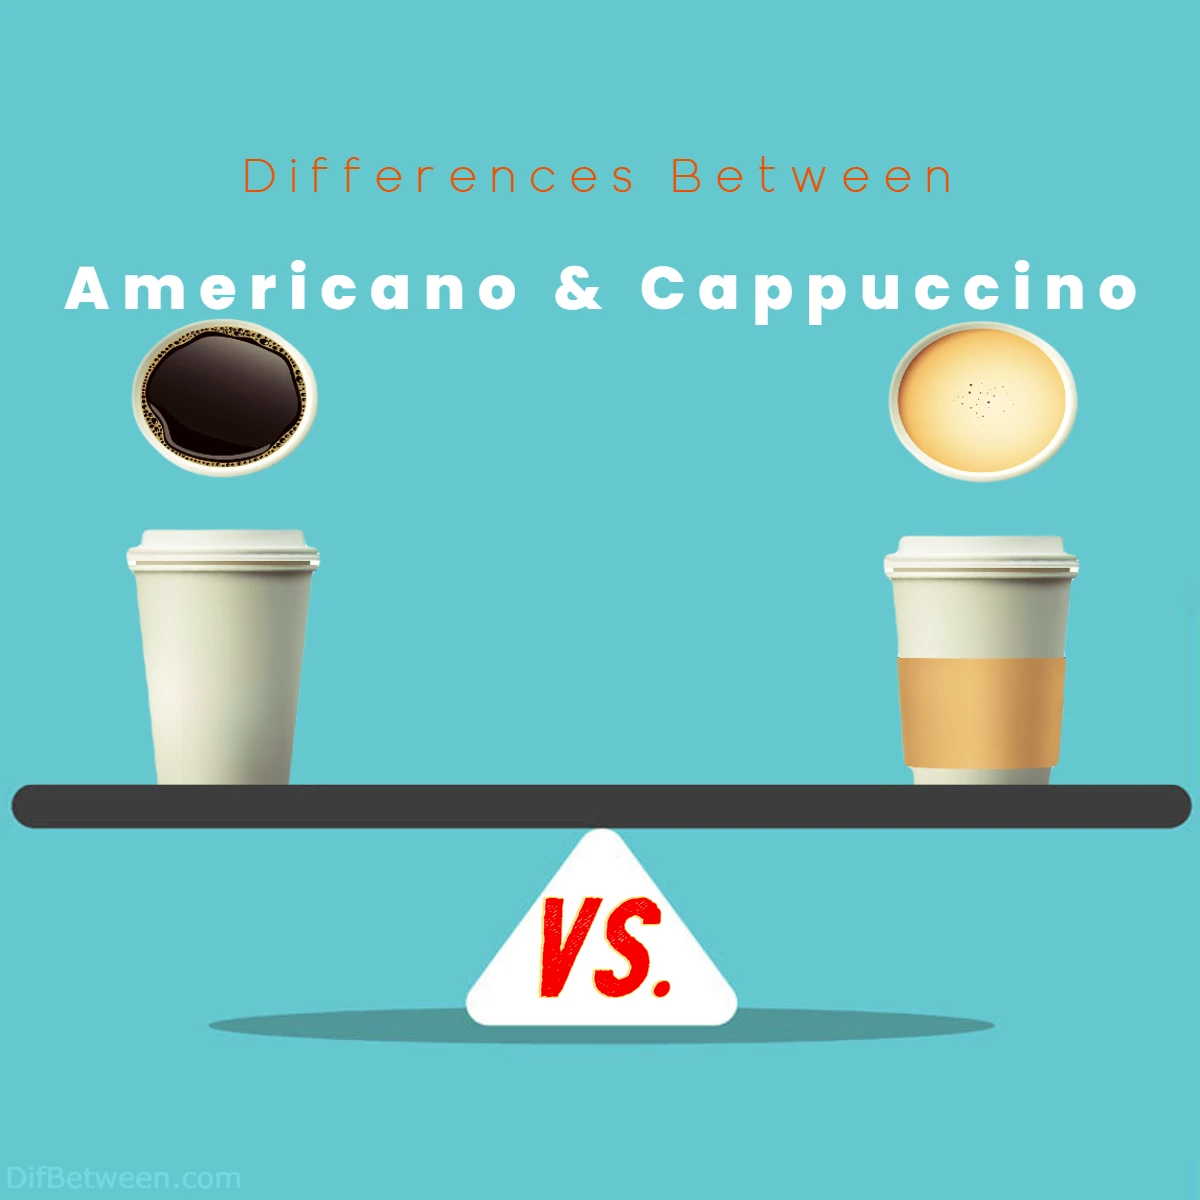 Differences Between Cappuccino and Americano